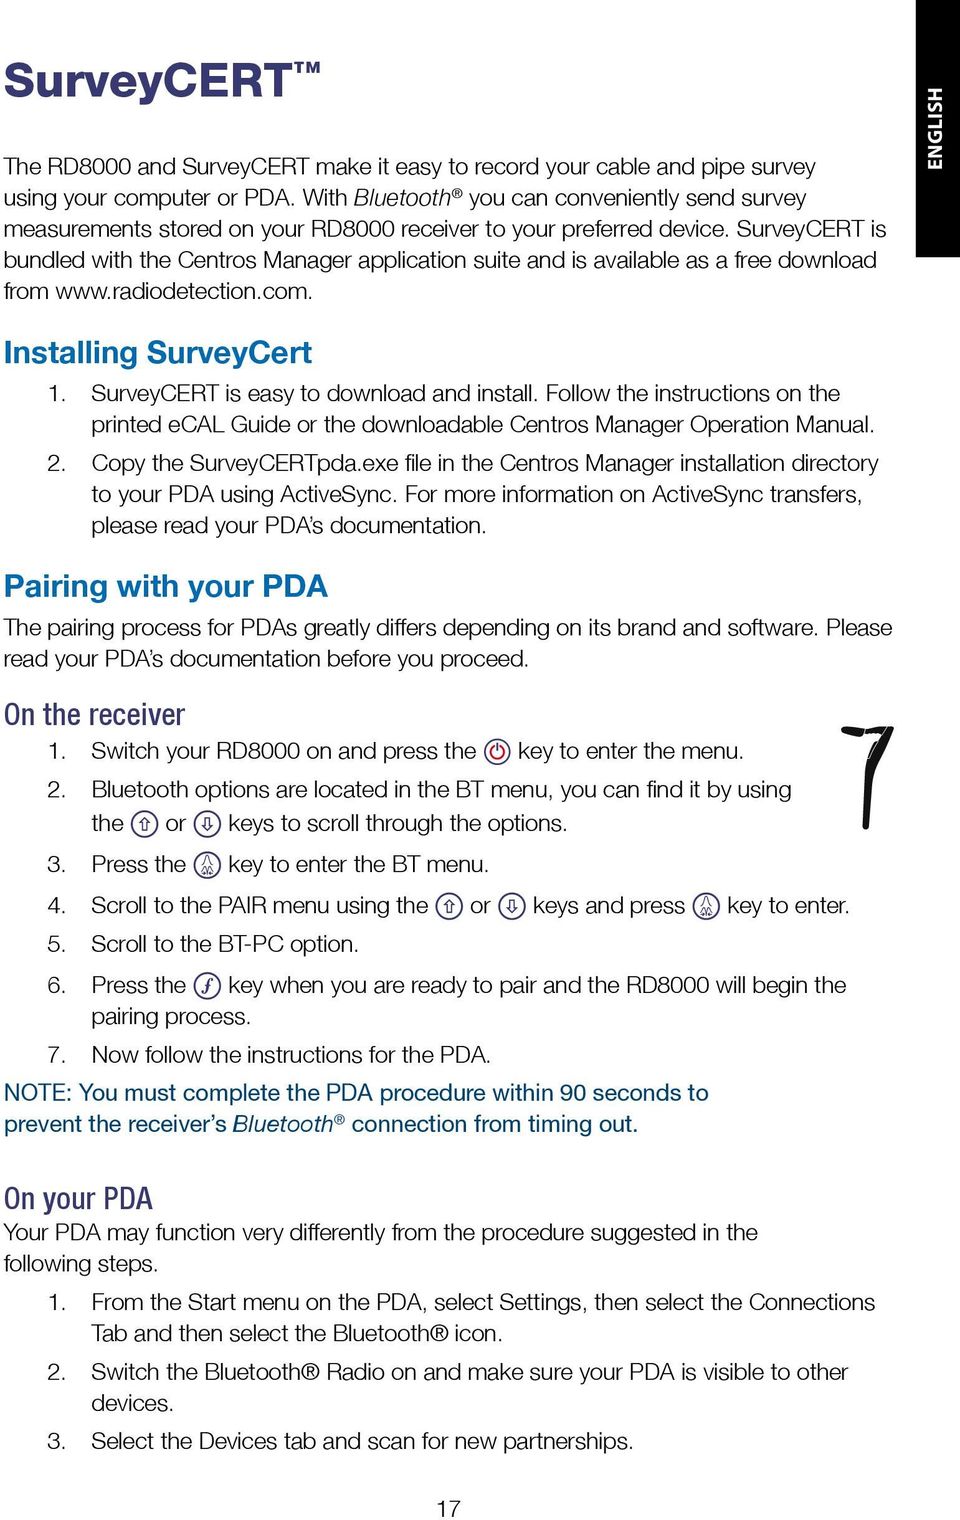 is easy to download and install Follow the instructions on the printed ecal Guide or the downloadable Centros Manager Operation Manual Copy the SurveyCERTpdaexe file in the Centros Manager